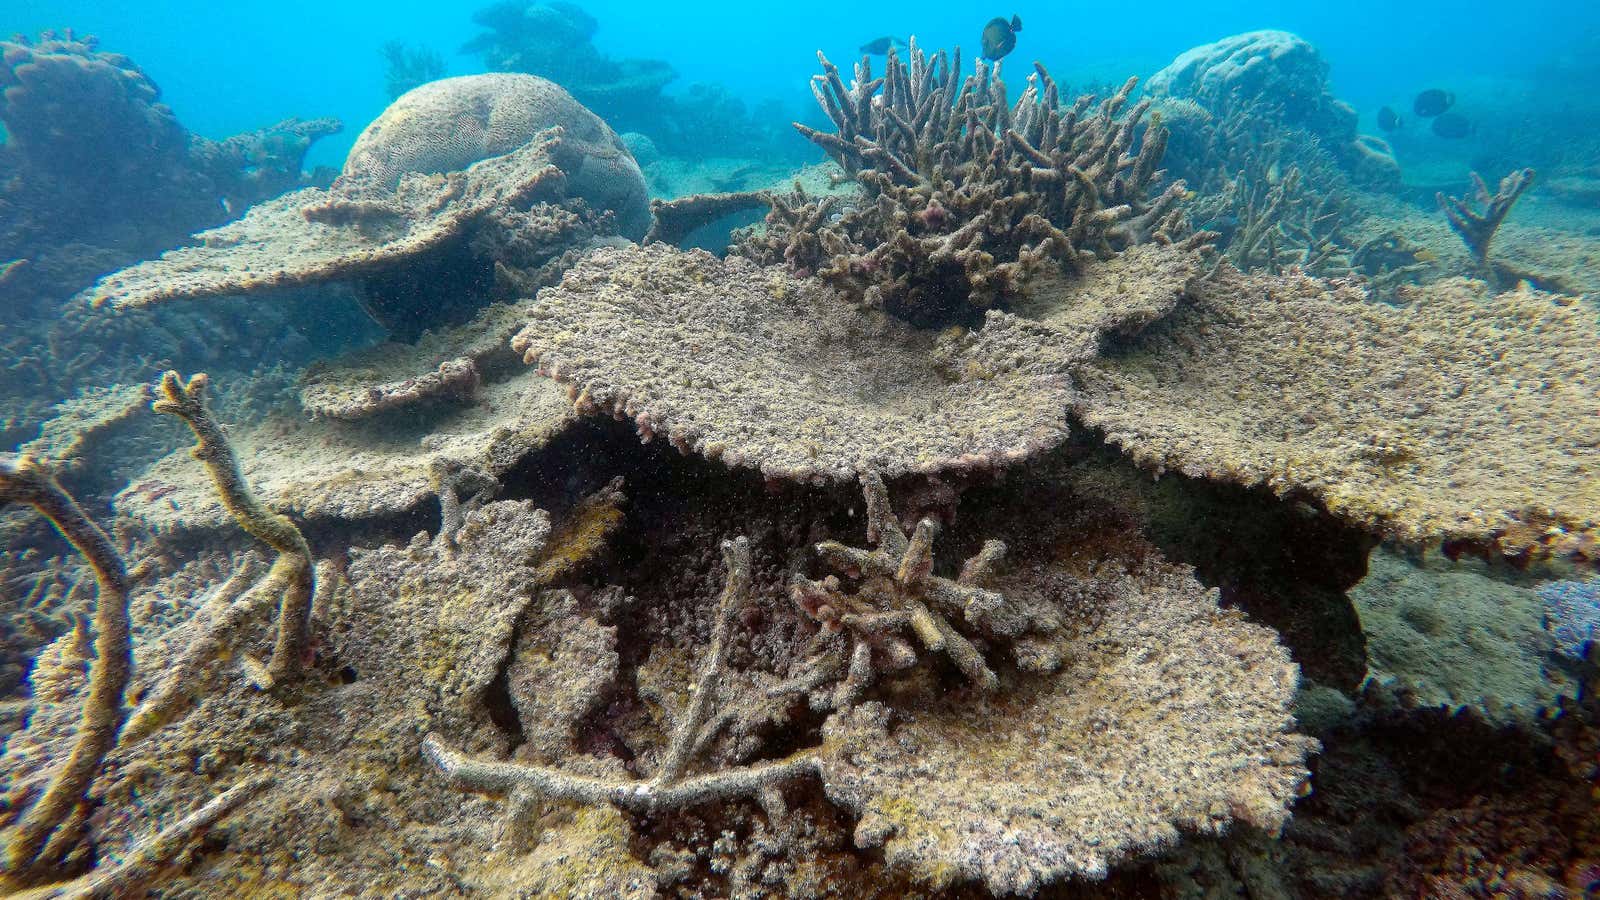 Without US support, saving the great coral reefs of the globe’s ocean might prove impossible.